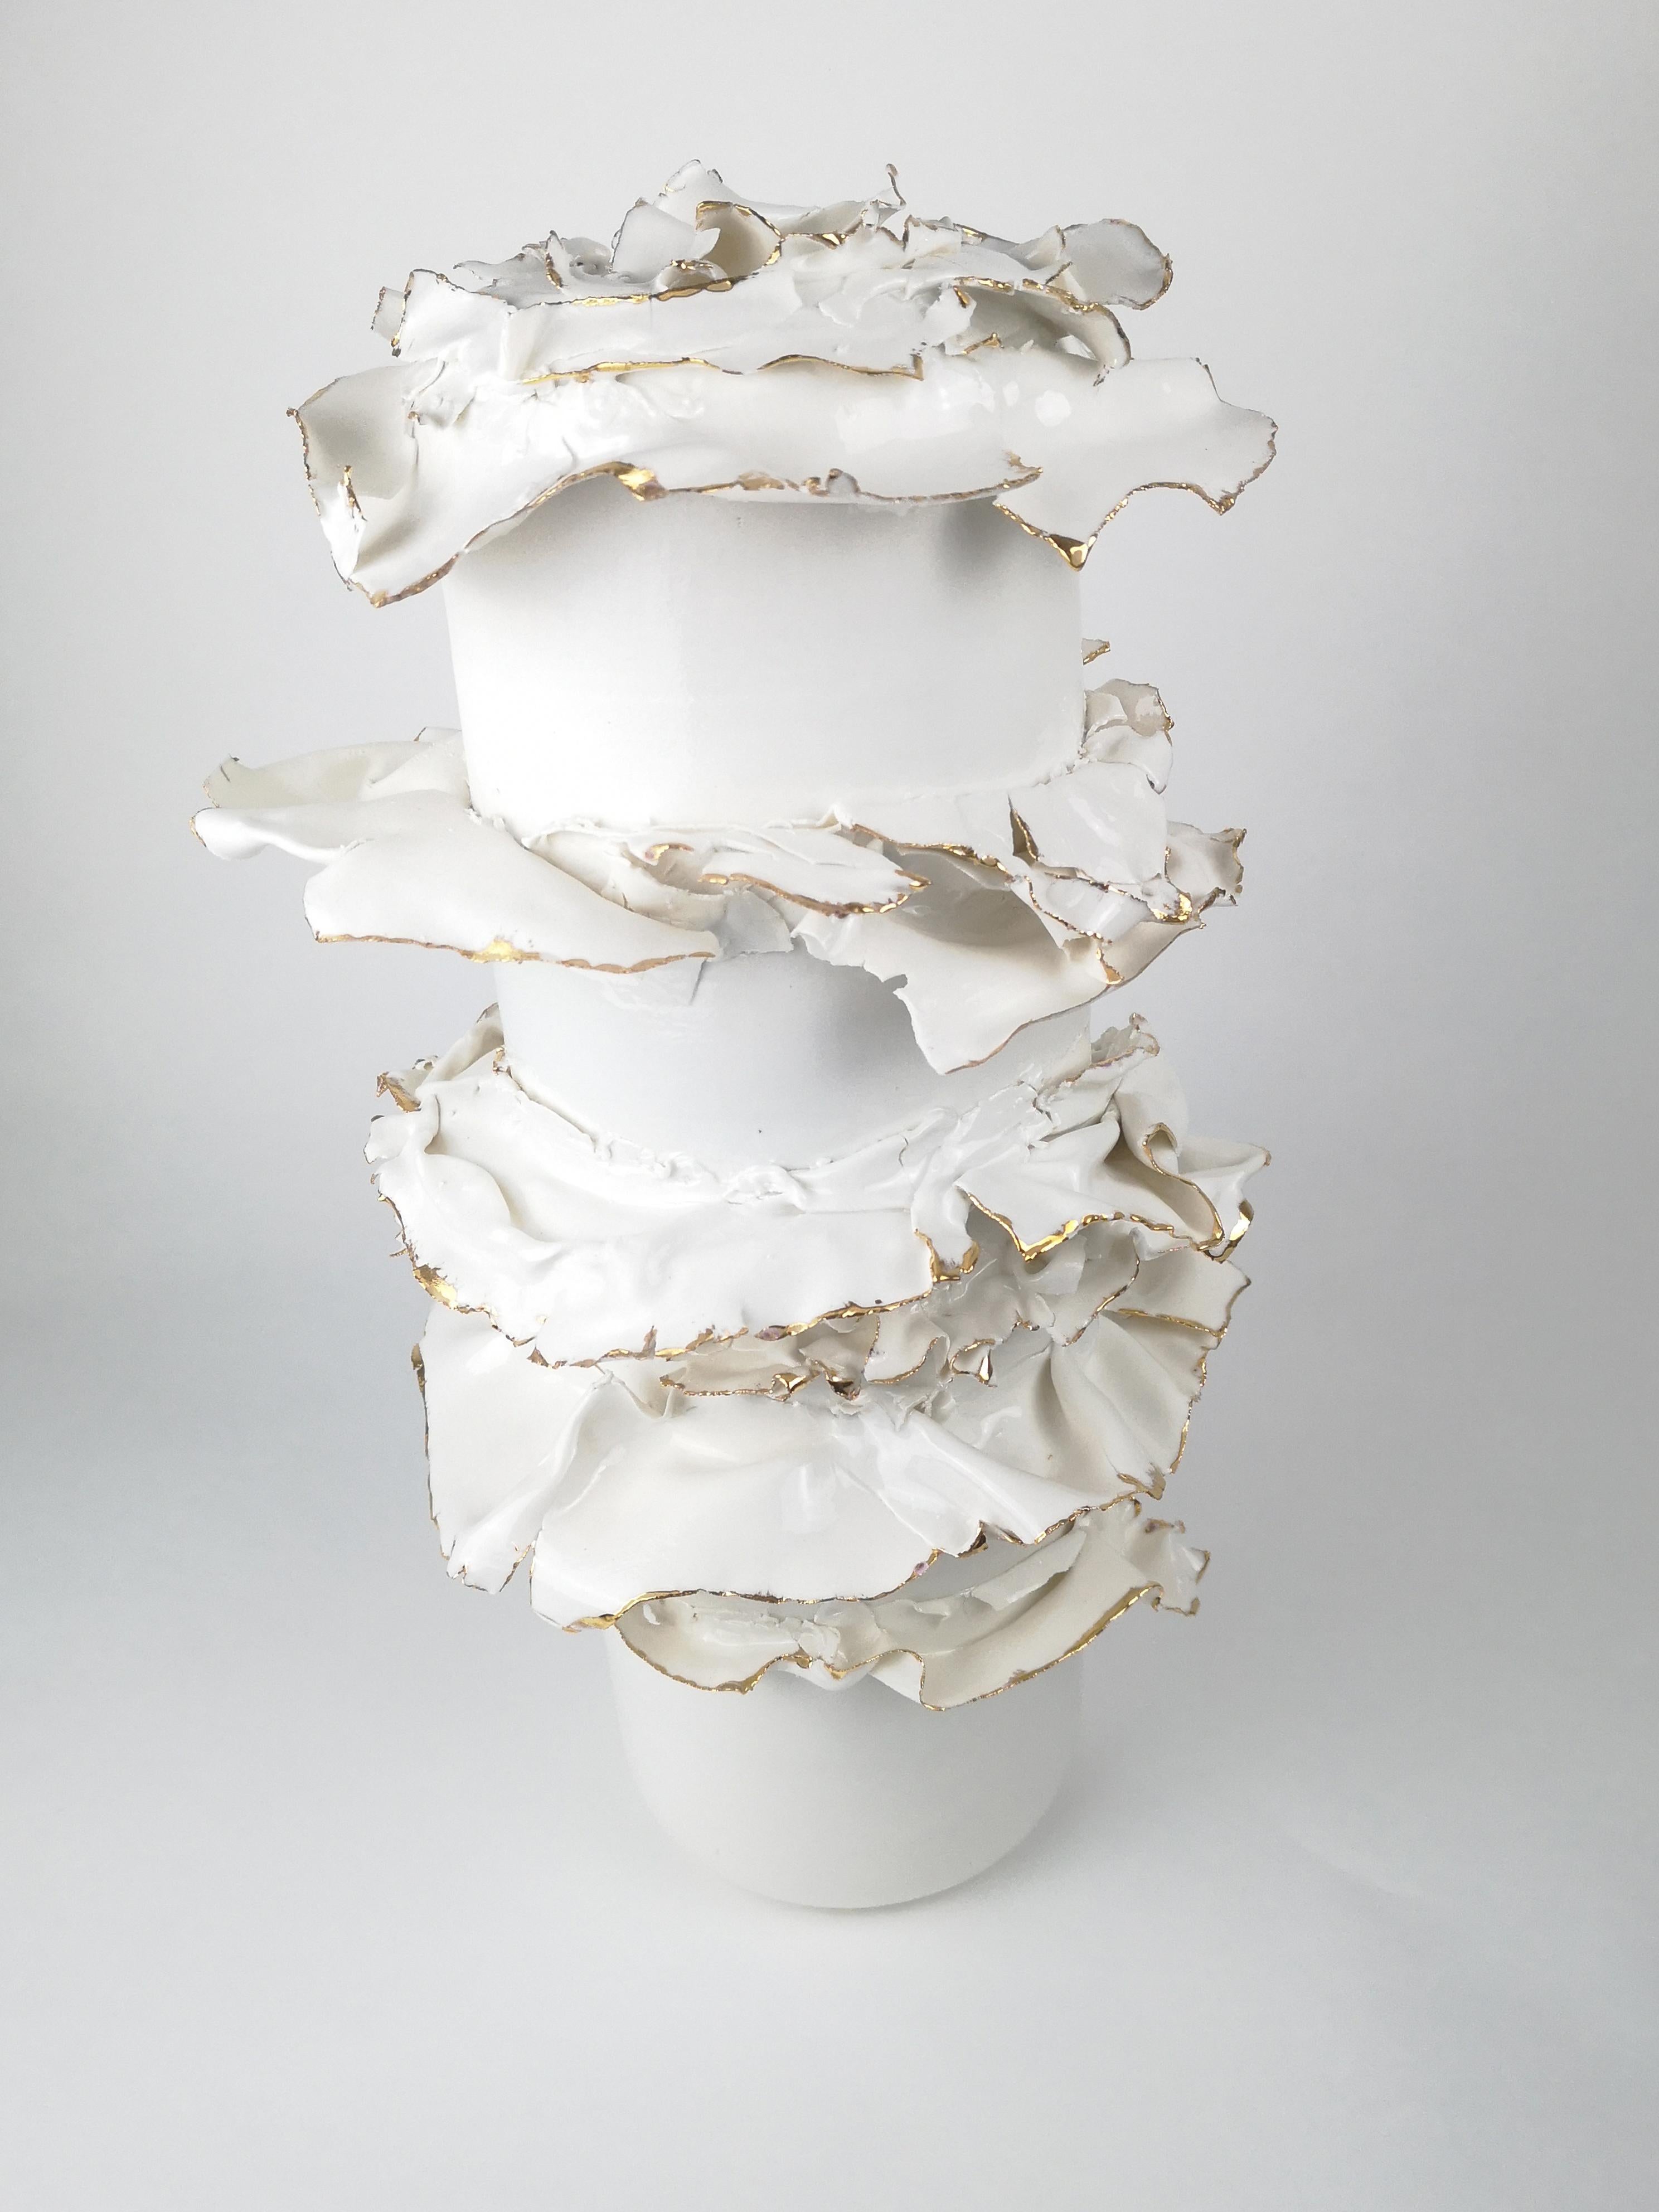 Rrippeled Beauty Sculpture by Dora Stanczel
One of a Kind.
Dimensions: D 20 x W 20 x H 32 cm.
Materials: Porcelain and gold.

I create bespoke and luxurious porcelain pieces with a careful aesthetic. Beyond the technical mastery of casting, what